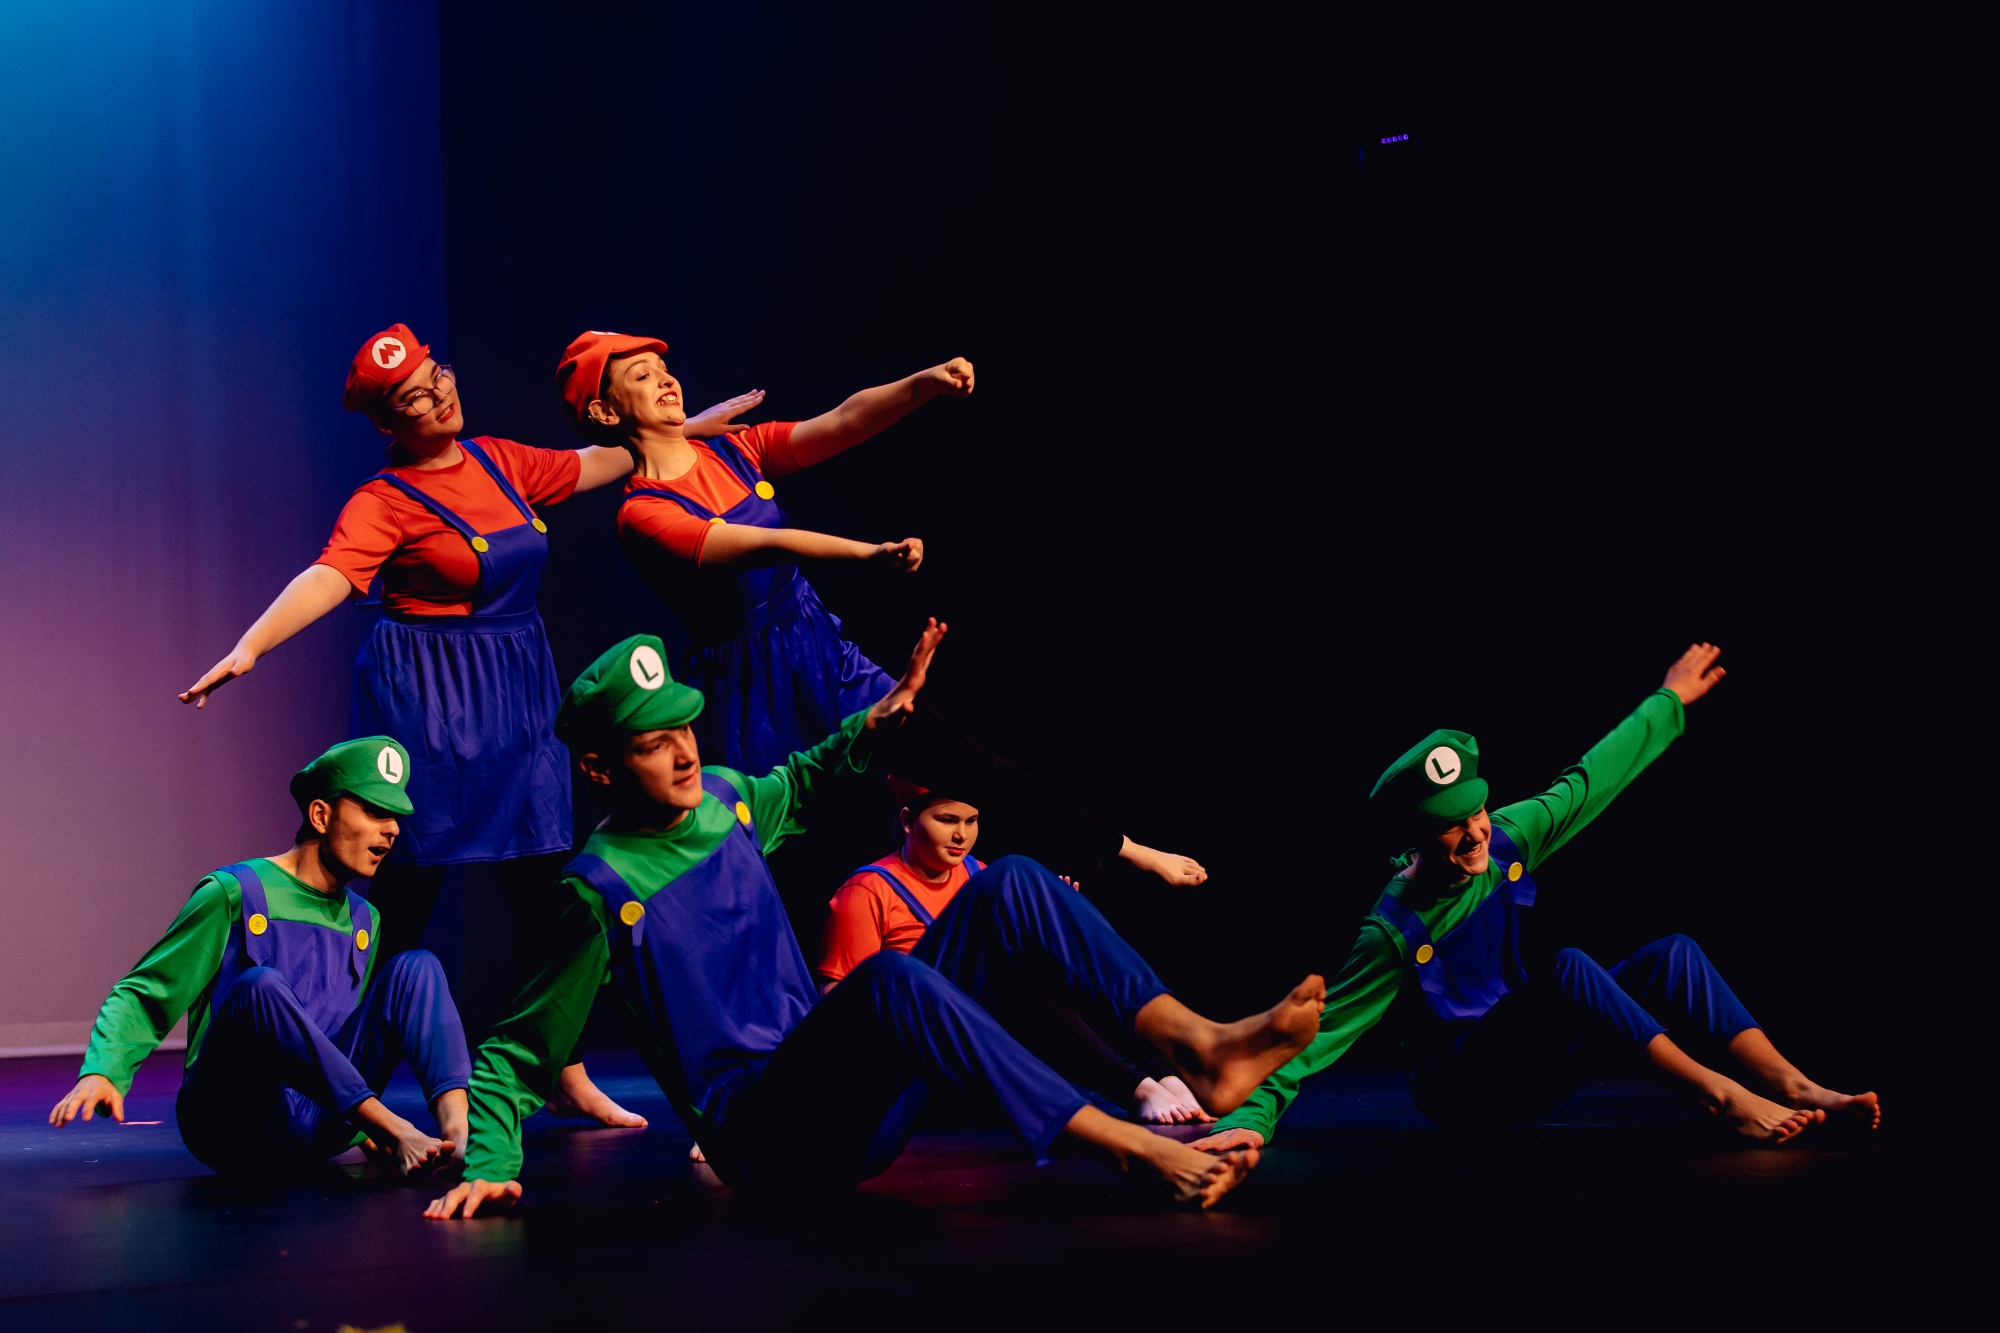 Wagga Wagga High School Learning Support students dressed as characters from Mario Brothers  with arms out stretched and leaning to the side